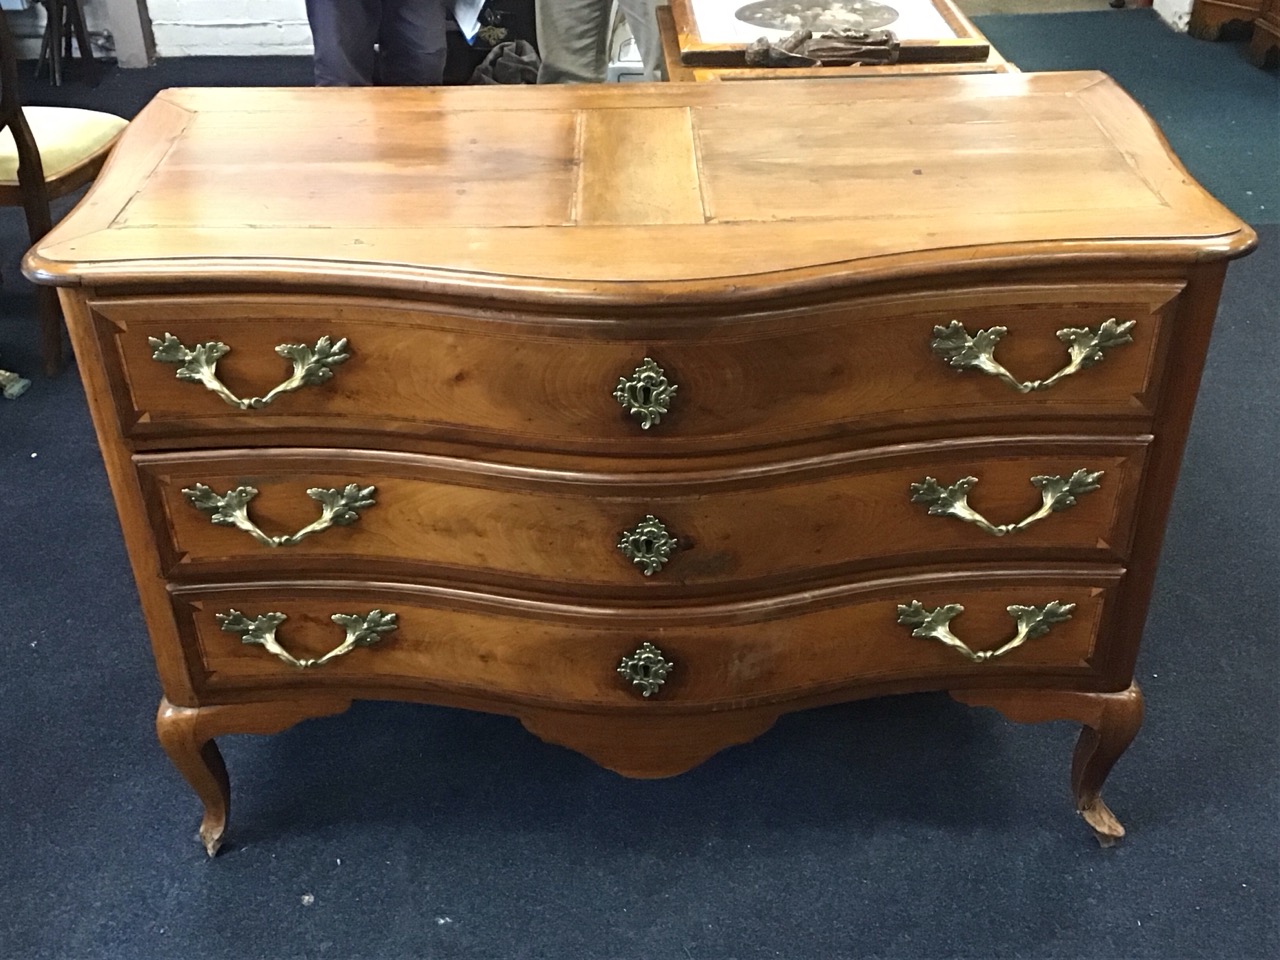 A C18th Italian serpentine fronted walnut commode, probably Piedmontese, with moulded rosewood - Image 2 of 3